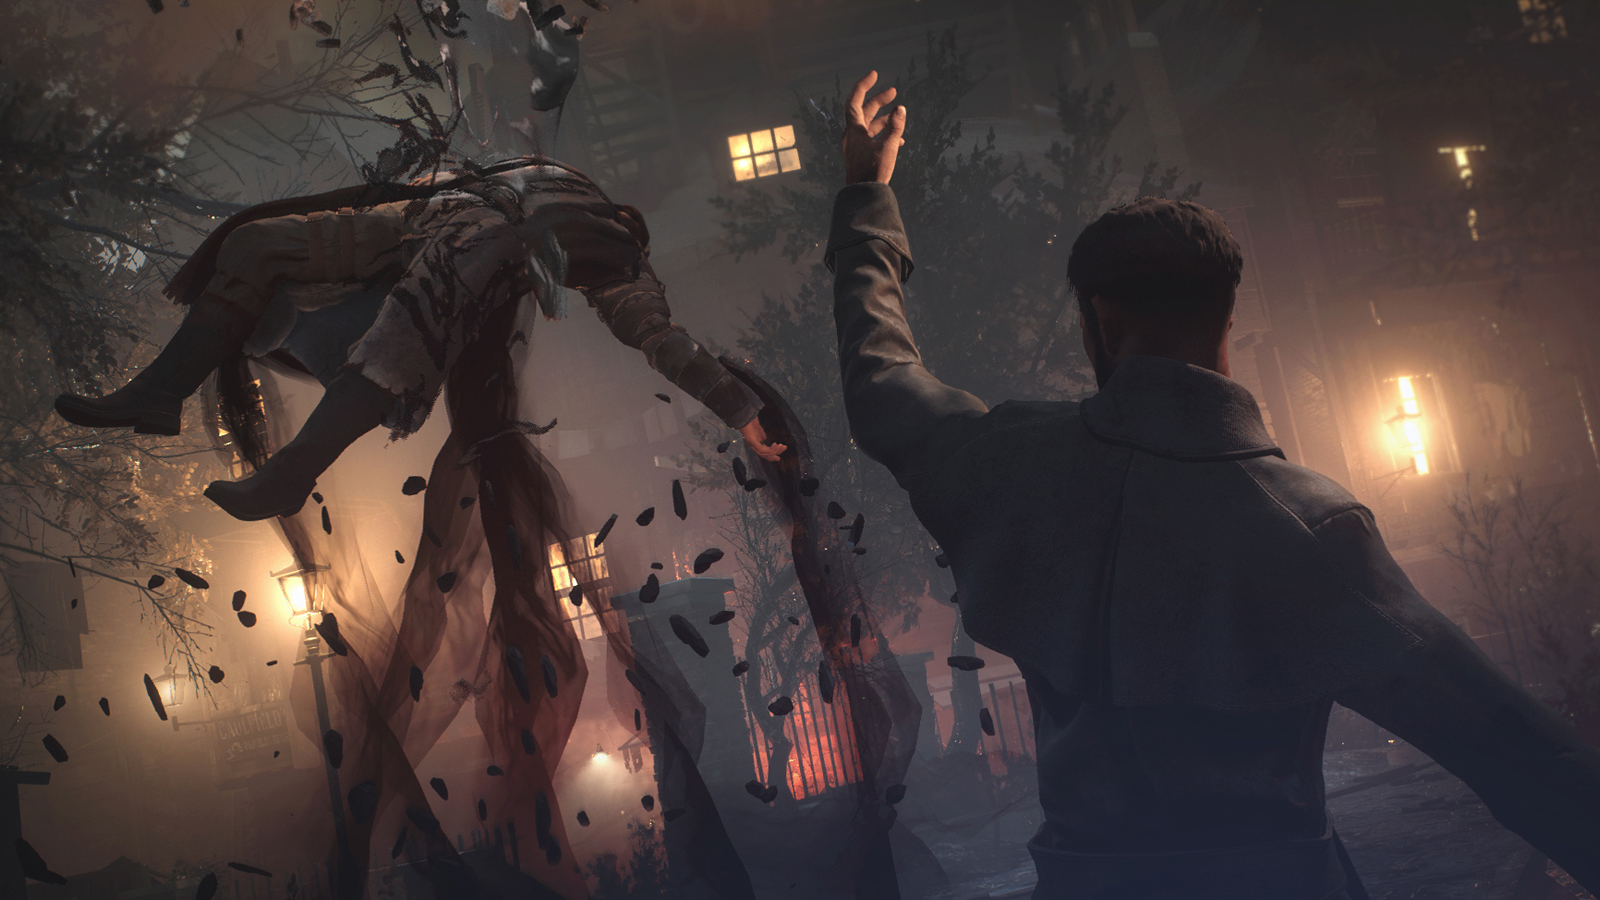 London culling: Dontnod on the creation of Vampyr's citizen system and  recreating London - MCV/DEVELOP